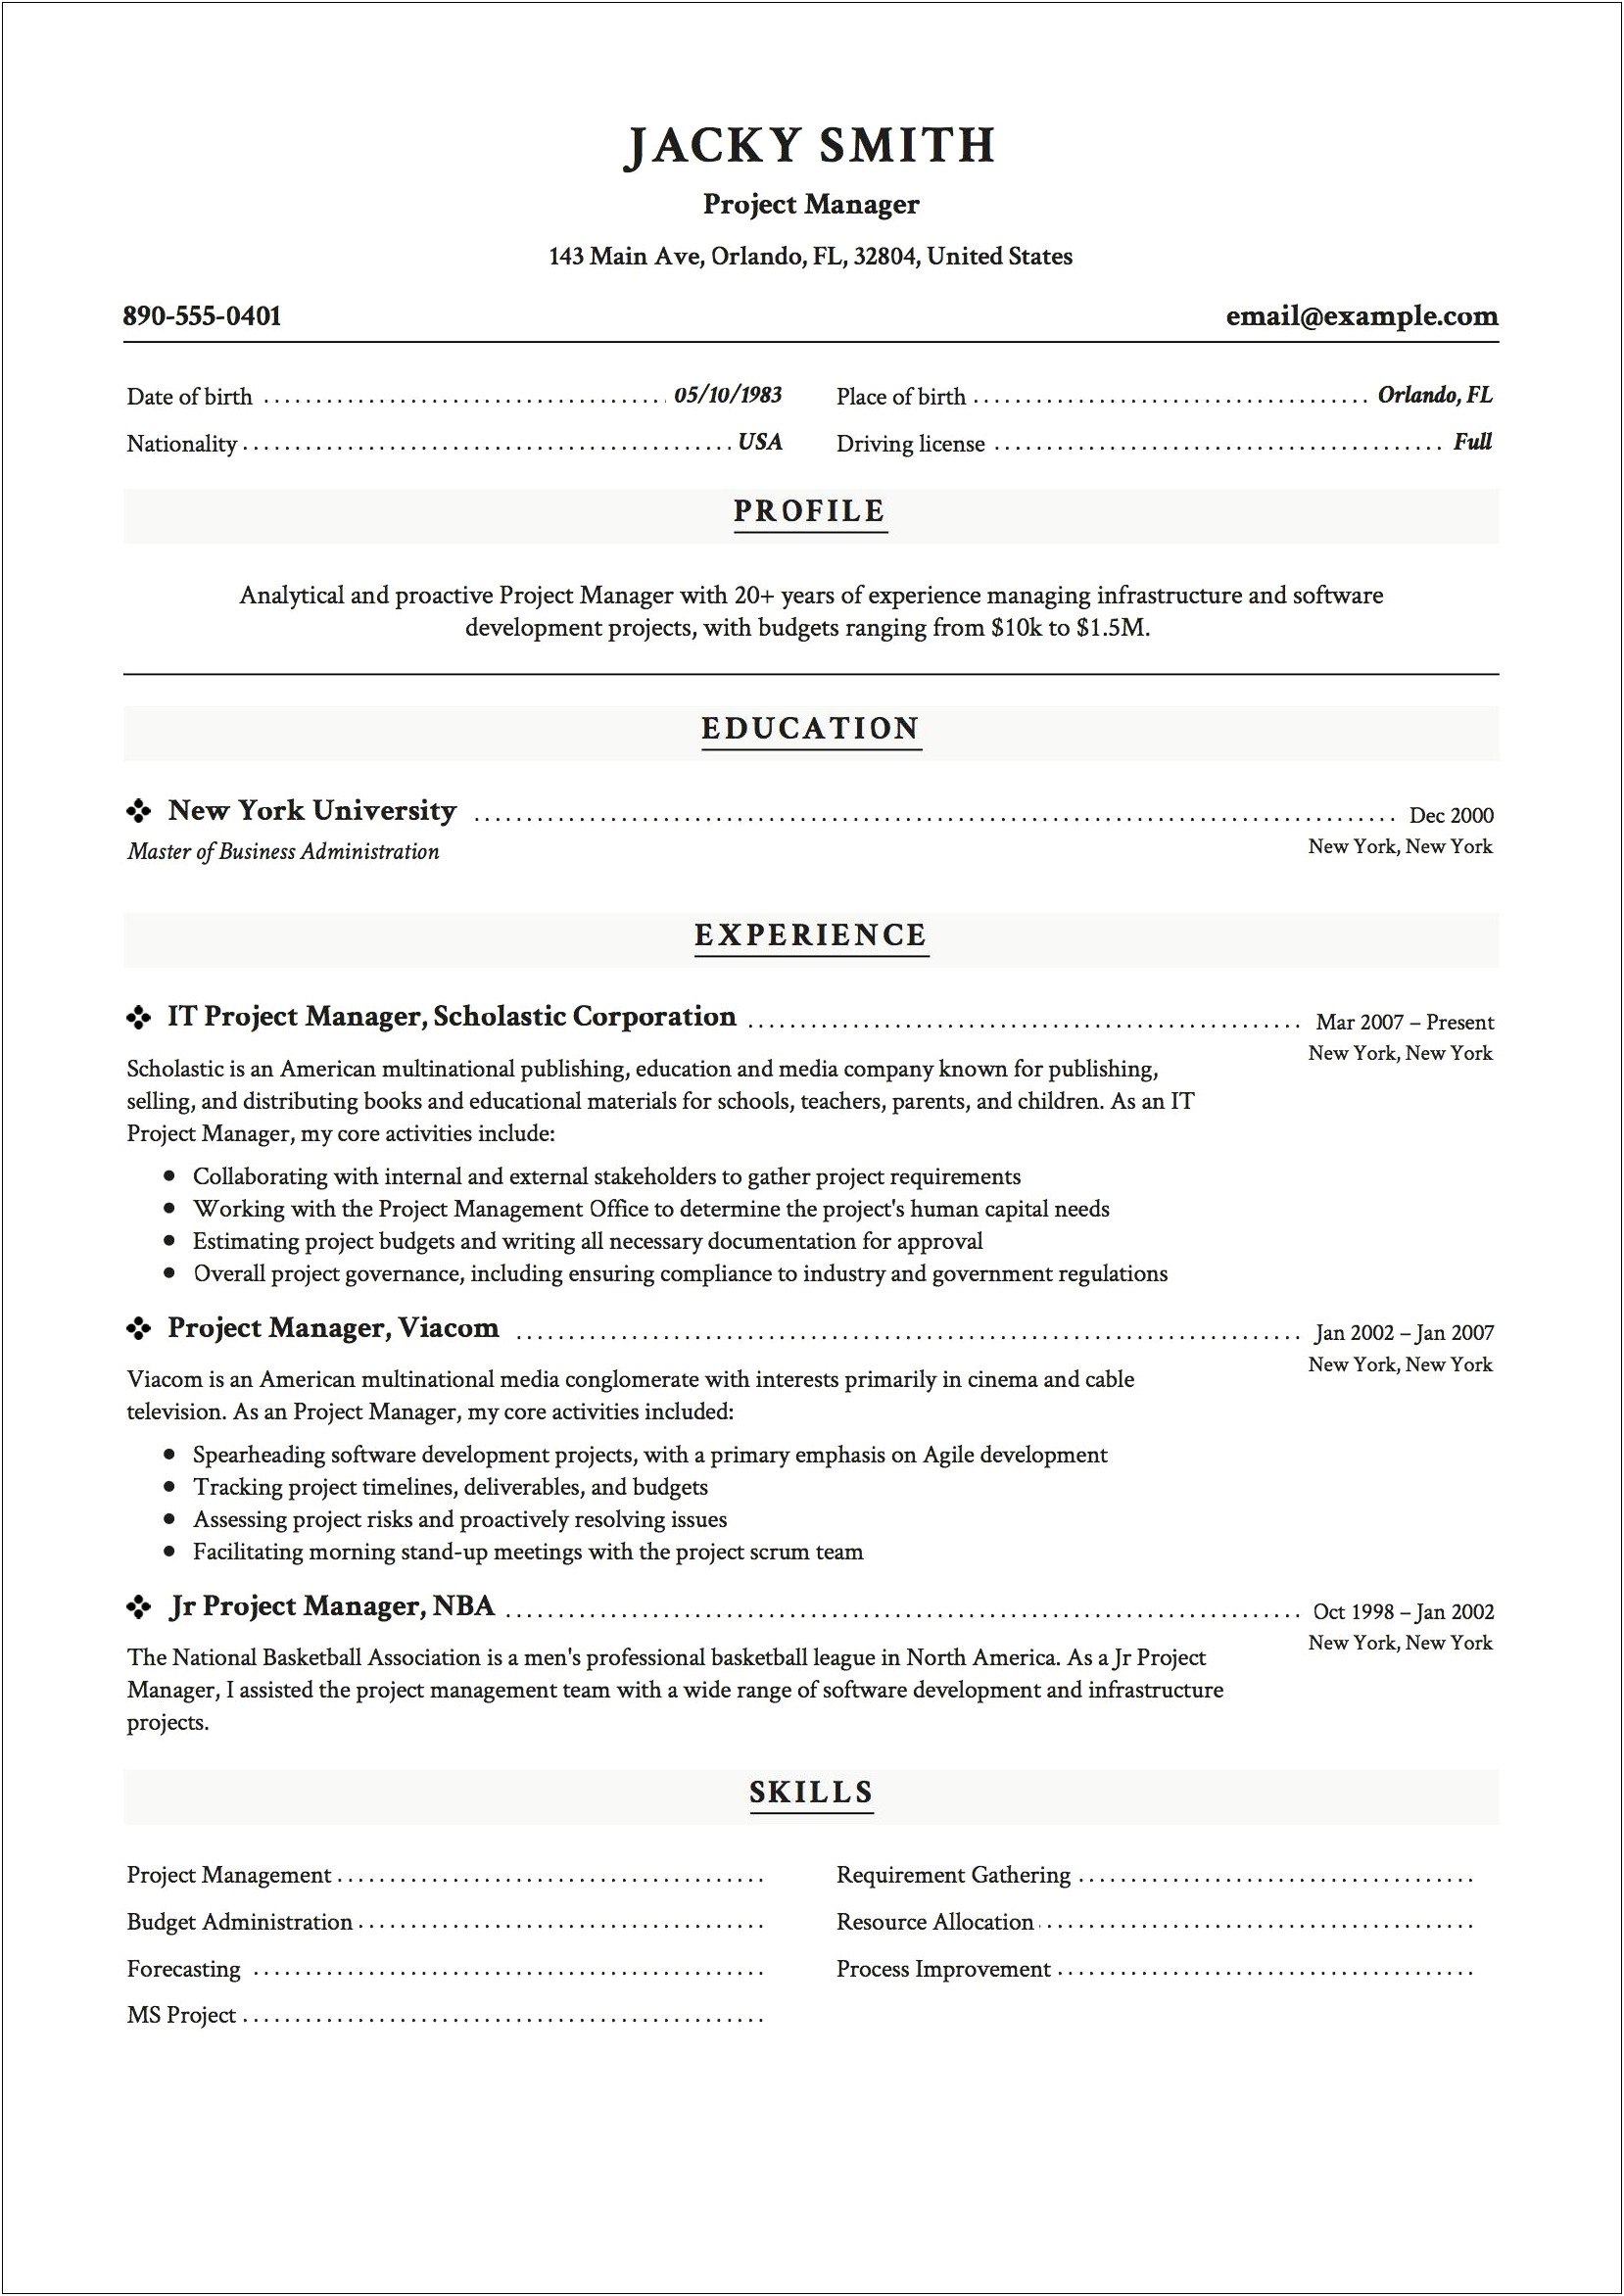 Seo Project Manager Resume Examples